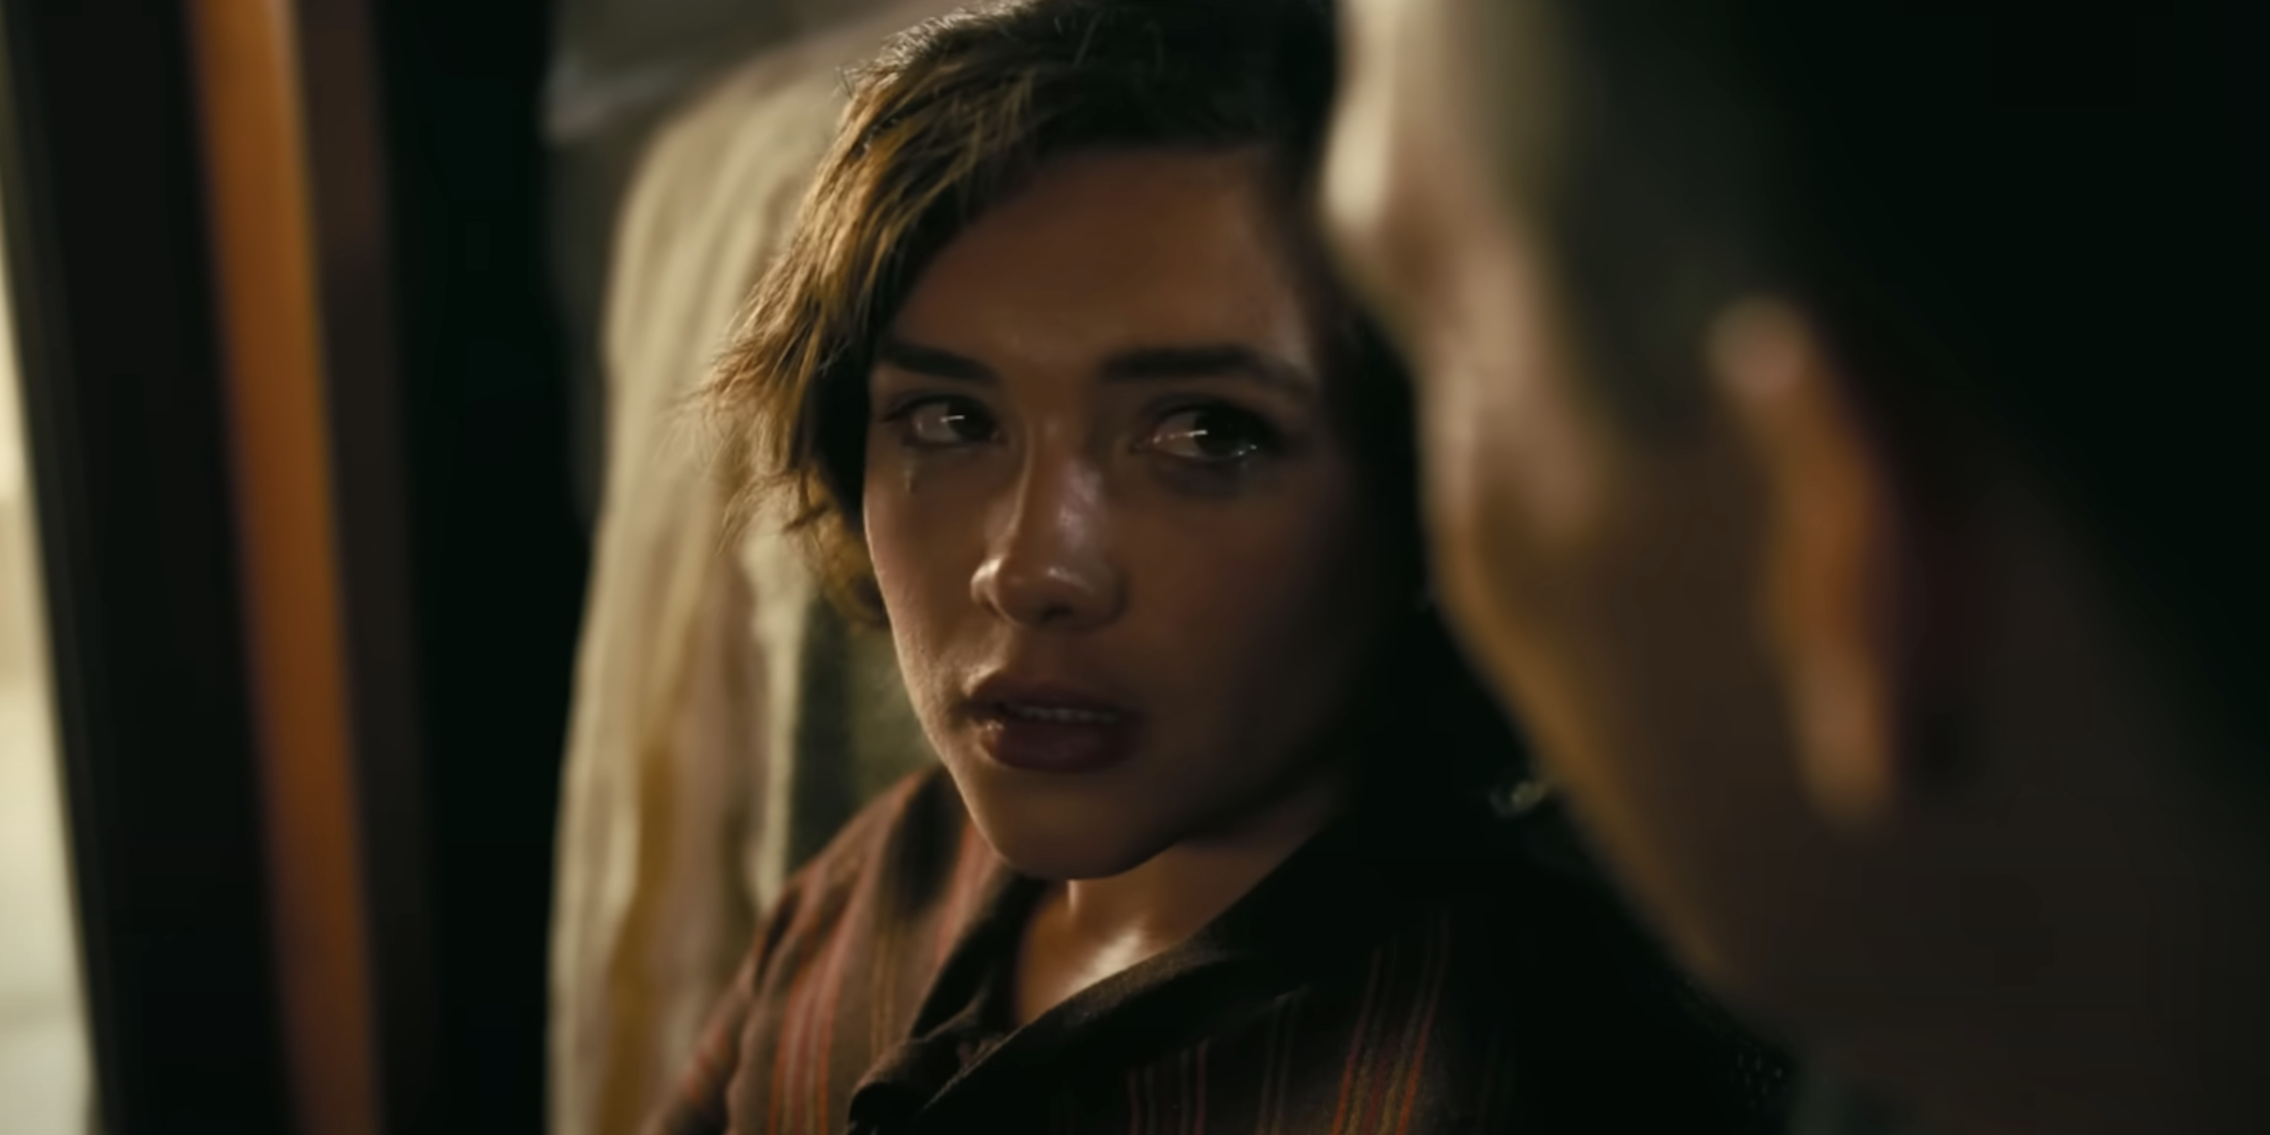 Florence Pugh looking at the camera and crying in the movie Oppenheimer. She plays Jean Tatlock.